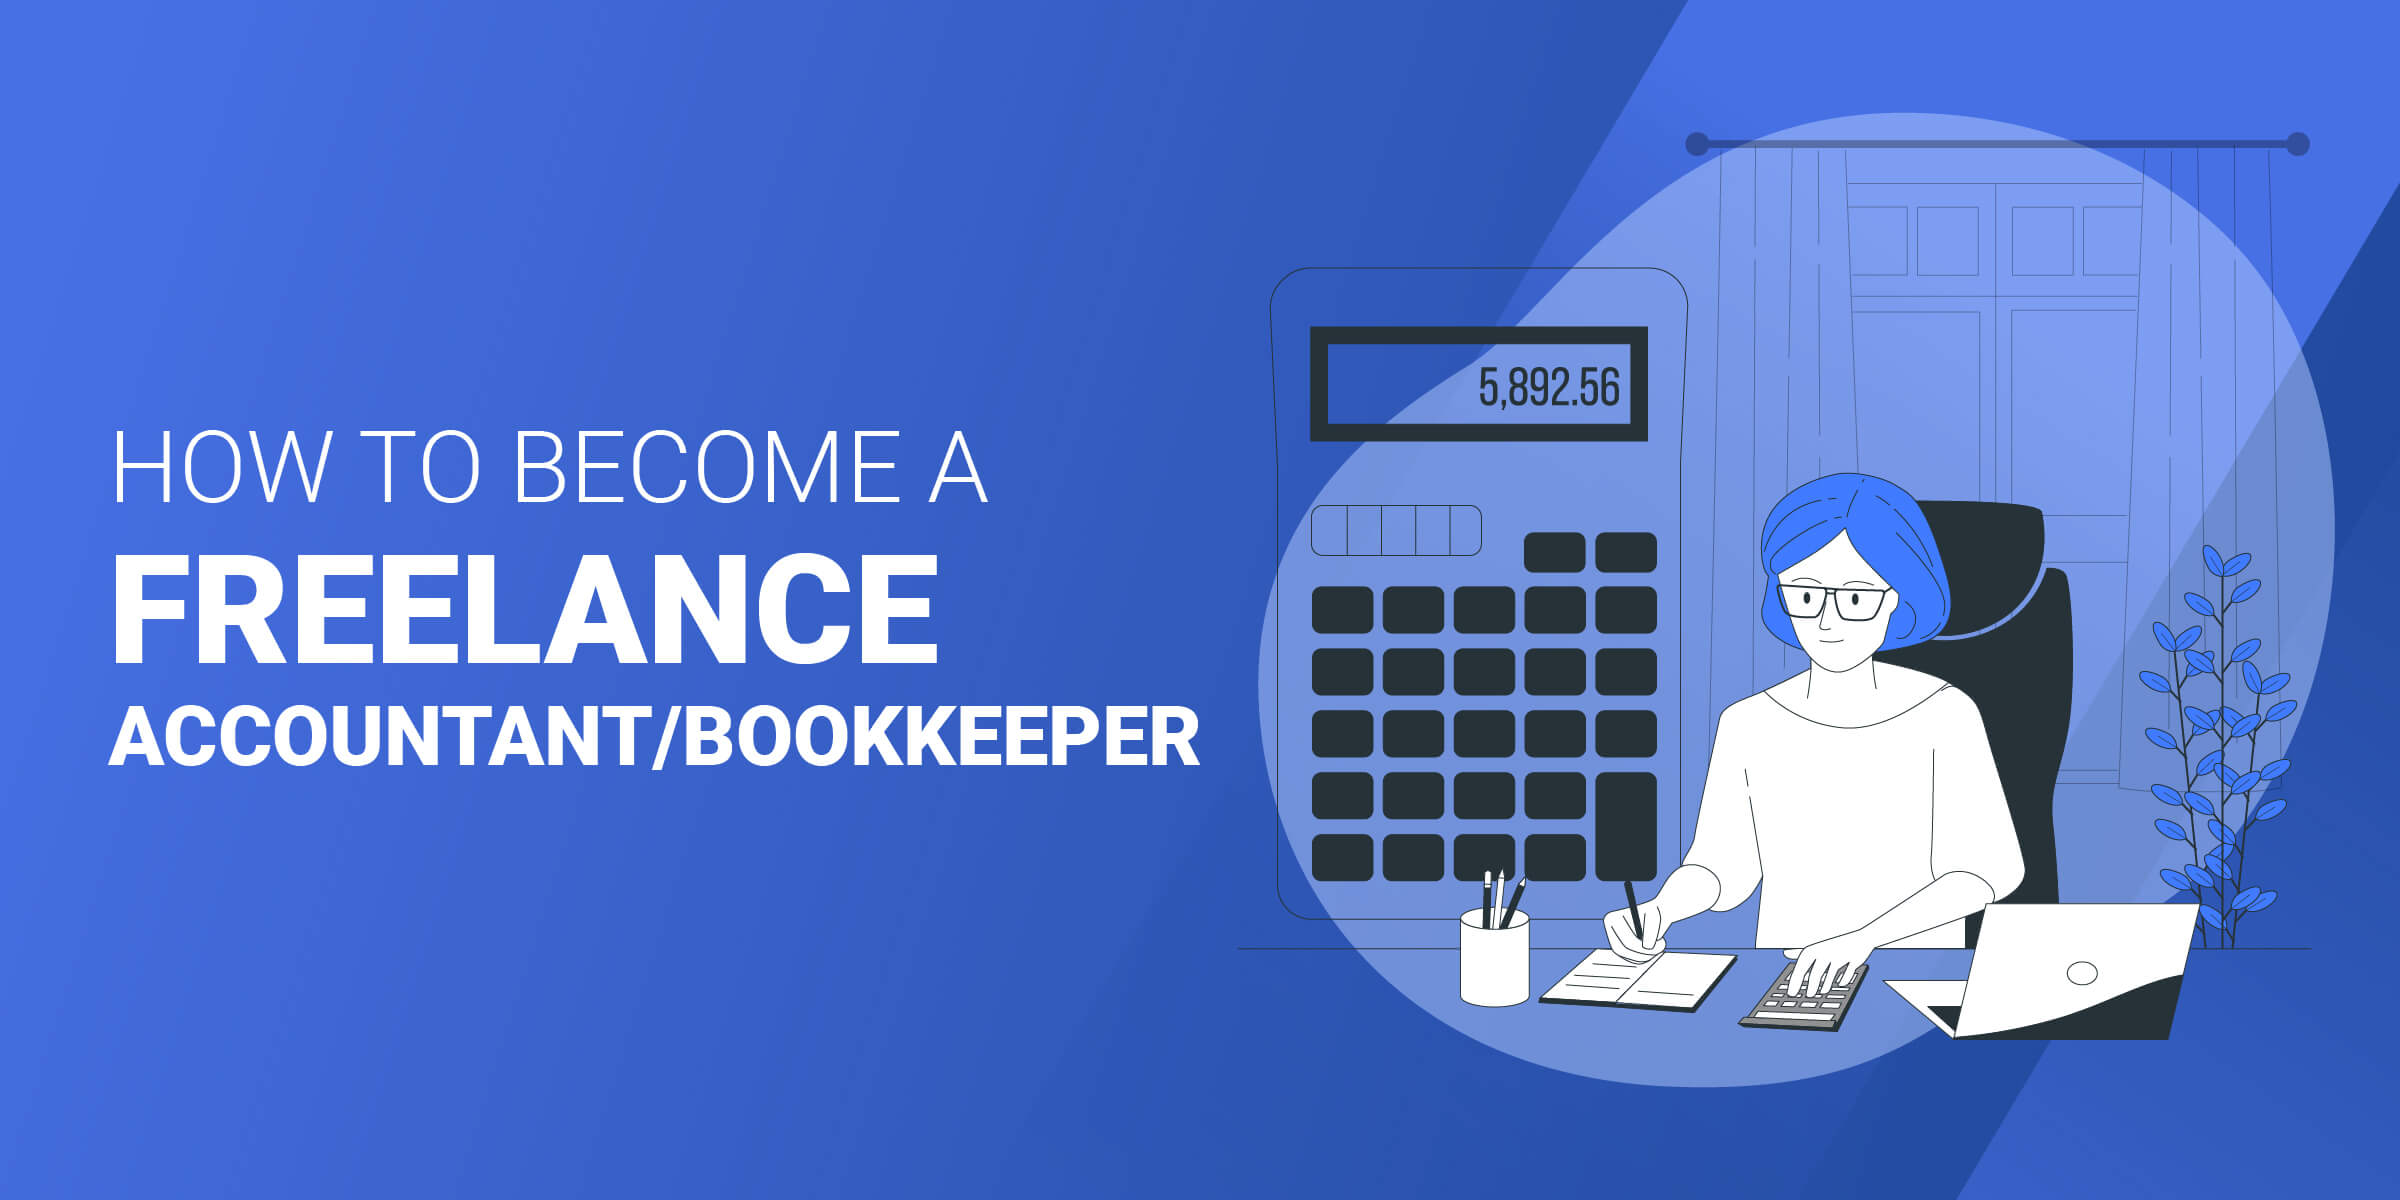 How to Become a Freelance Accountant